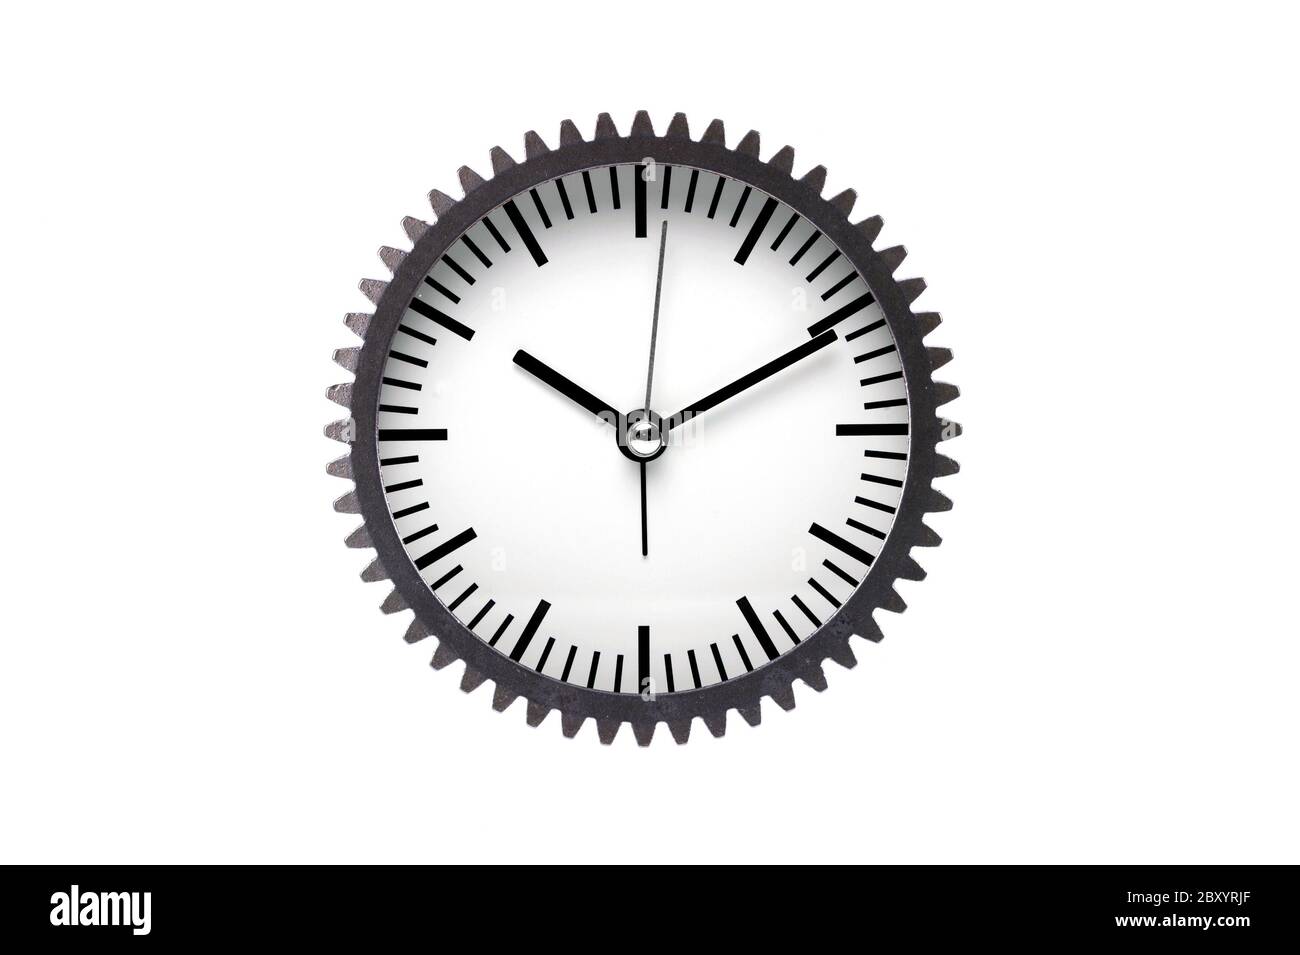 An analogue clock set against a white background Stock Photo